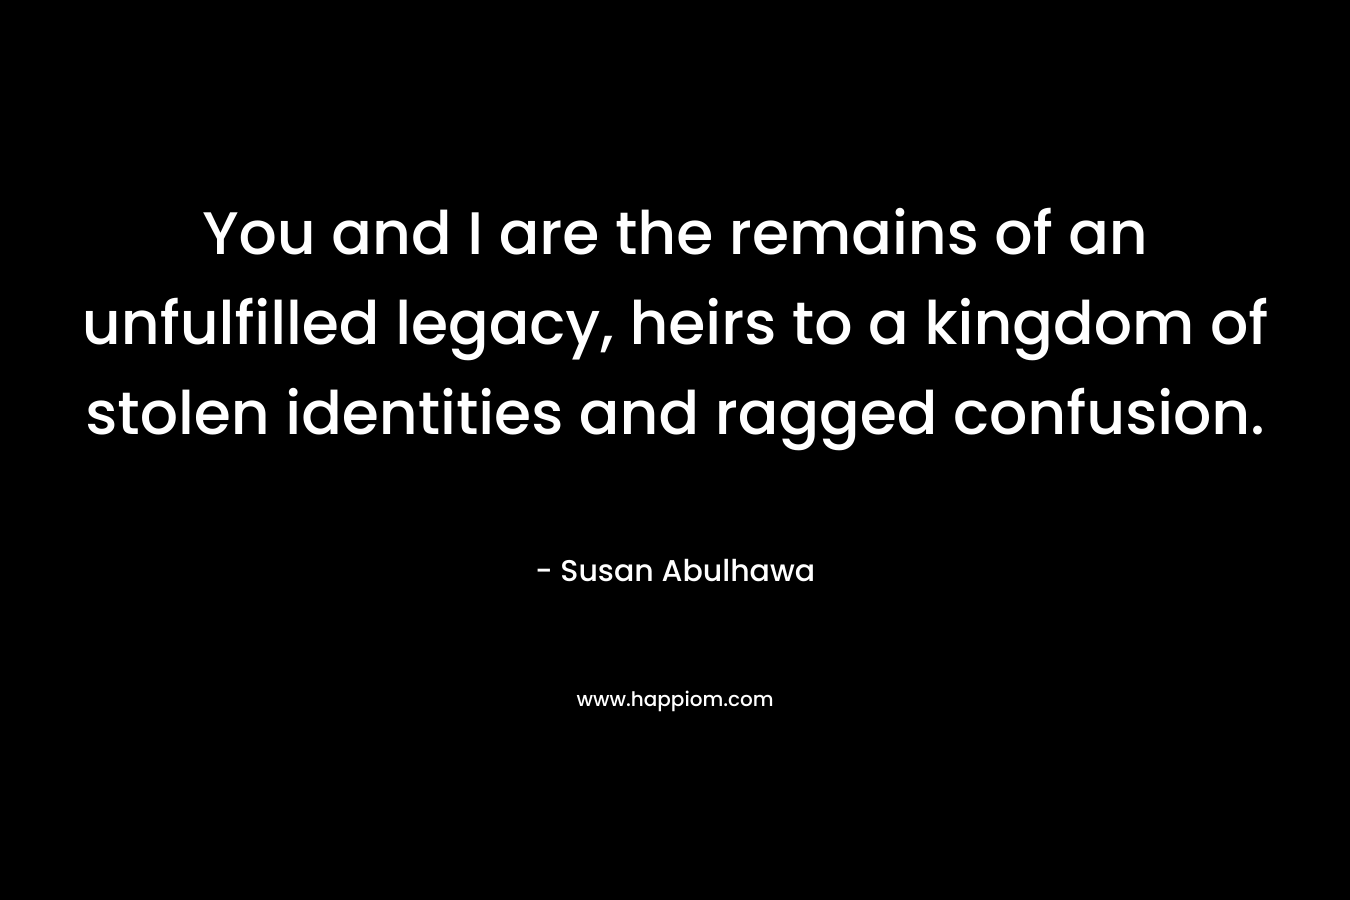 You and I are the remains of an unfulfilled legacy, heirs to a kingdom of stolen identities and ragged confusion. – Susan Abulhawa